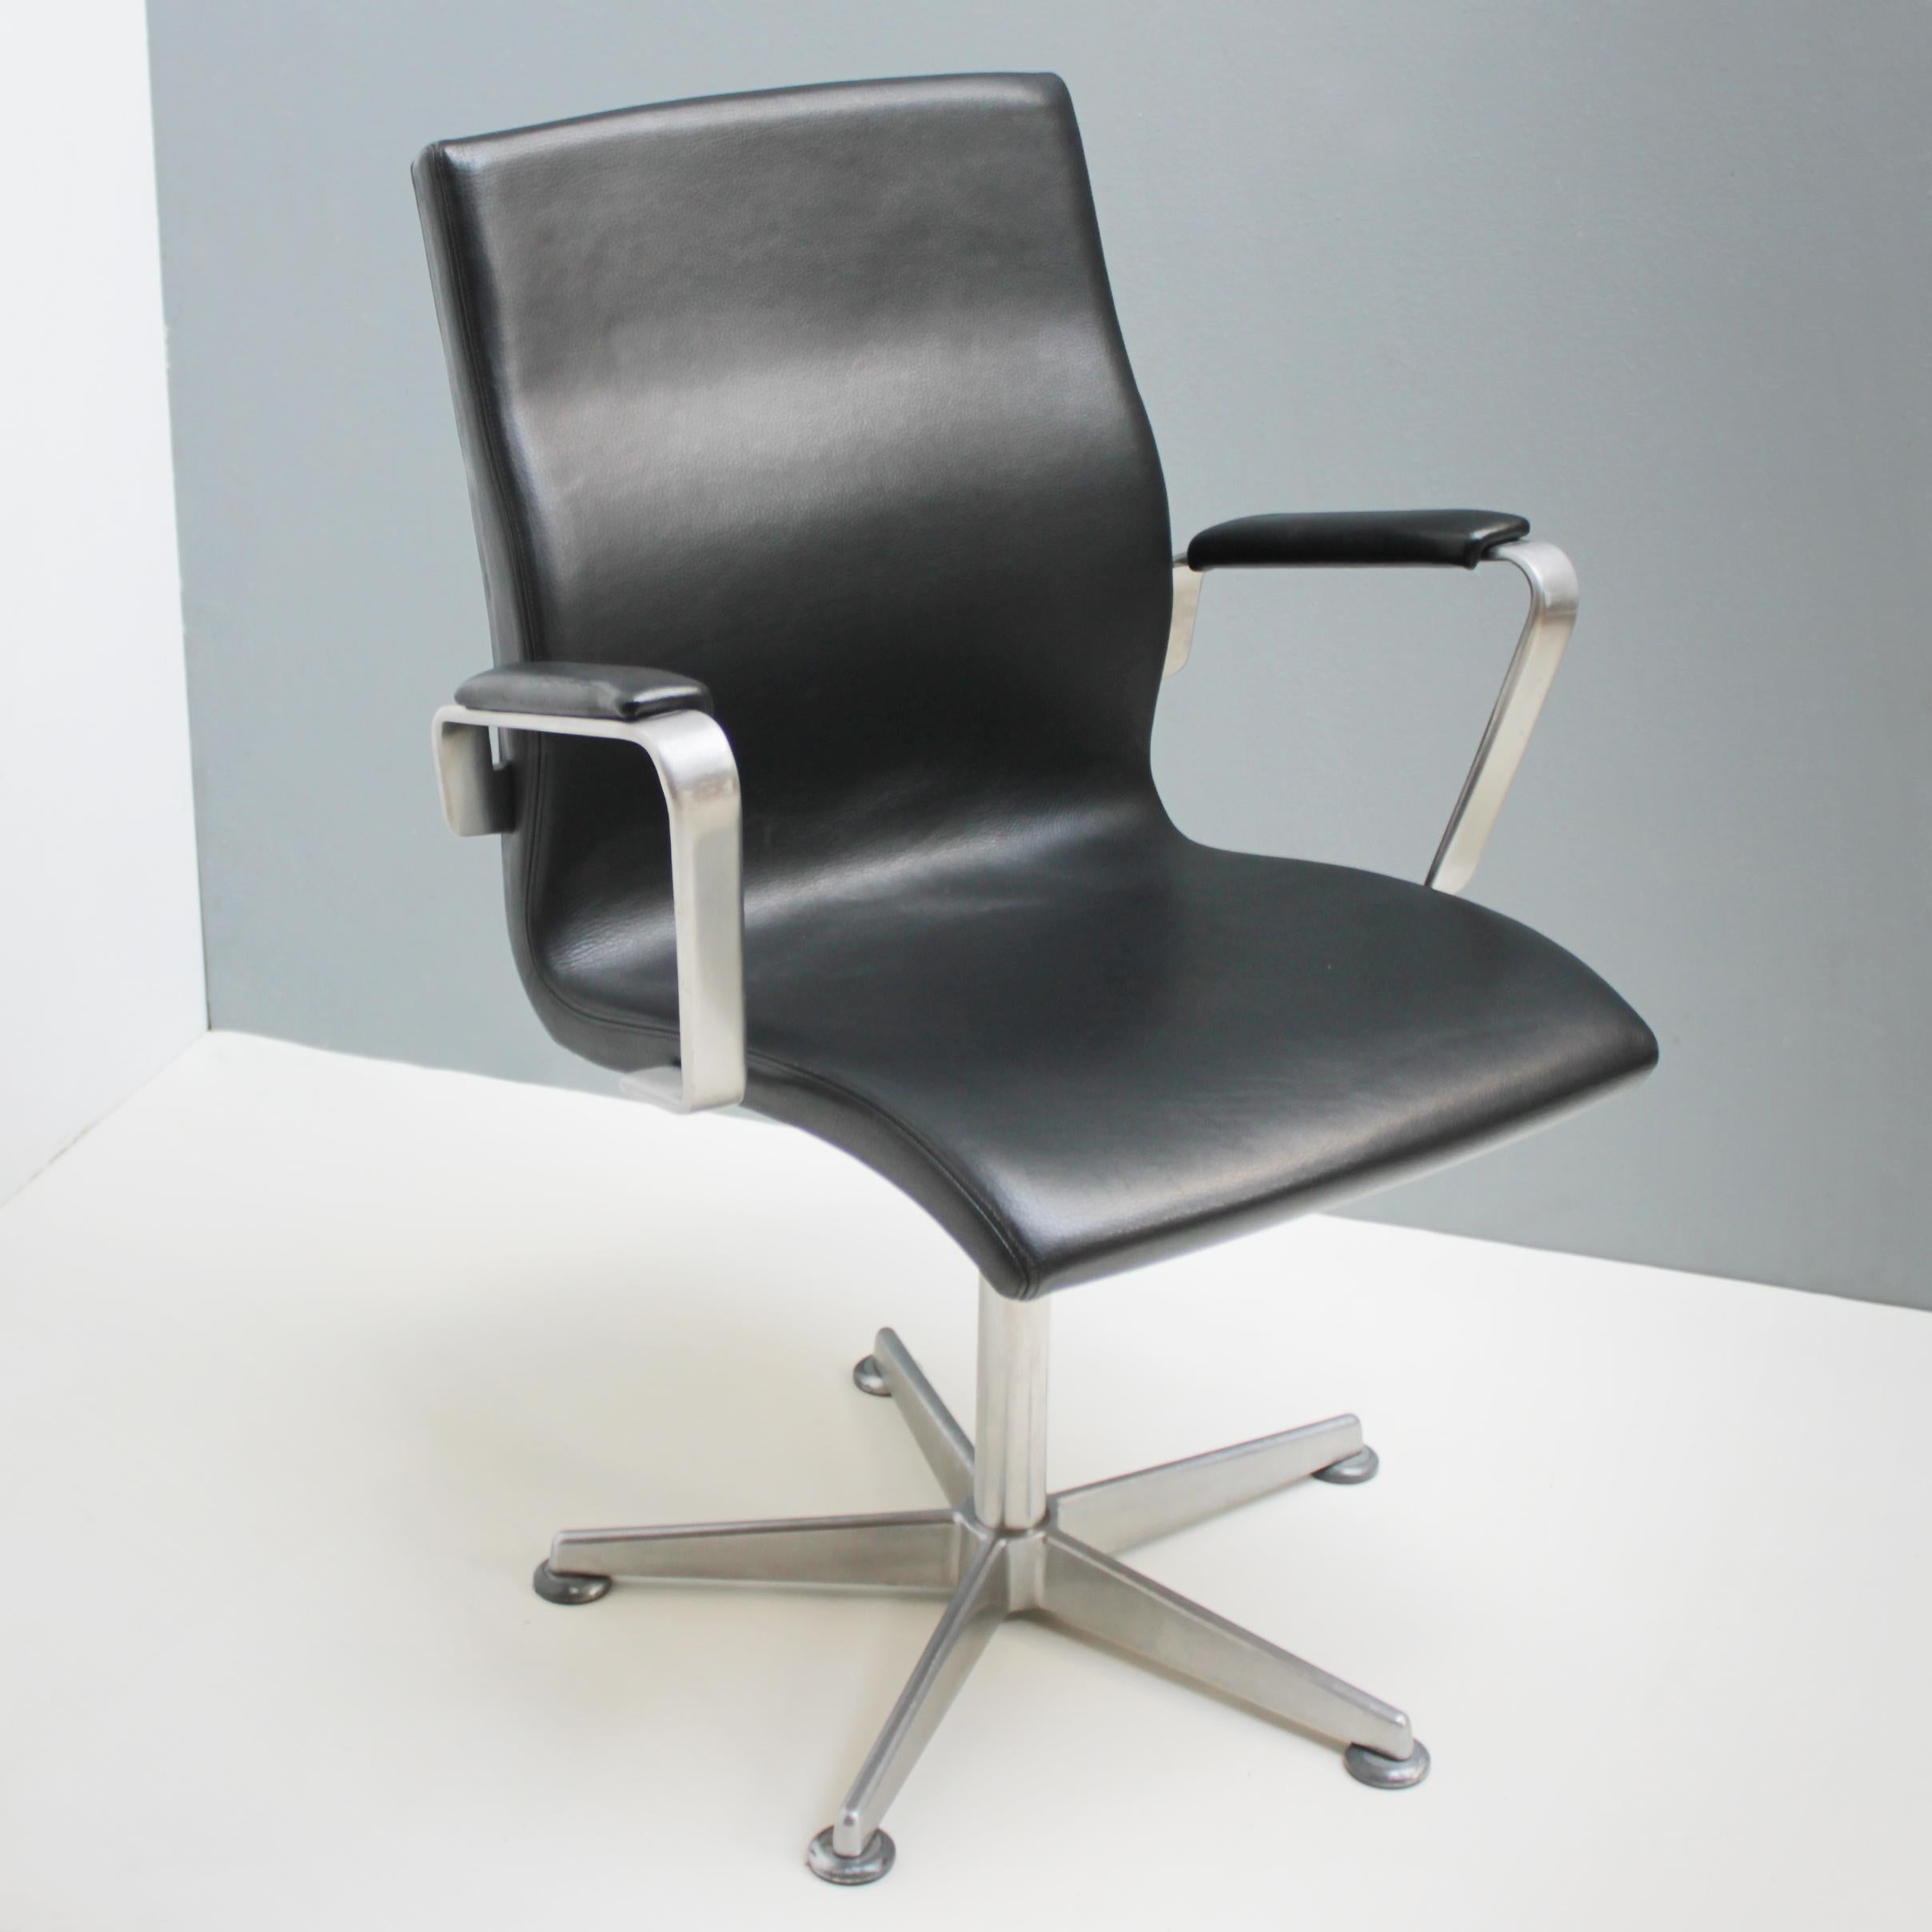 Oxford chair by Arne Jacobsen for Fritz Hansen model 3271. Low back in black leather with arm rests. Swiveling aluminium five star base with glides. Marked Fritz Hansen, 1994. Nice original version with the flat side.
Dimensions: height 35.4 in.